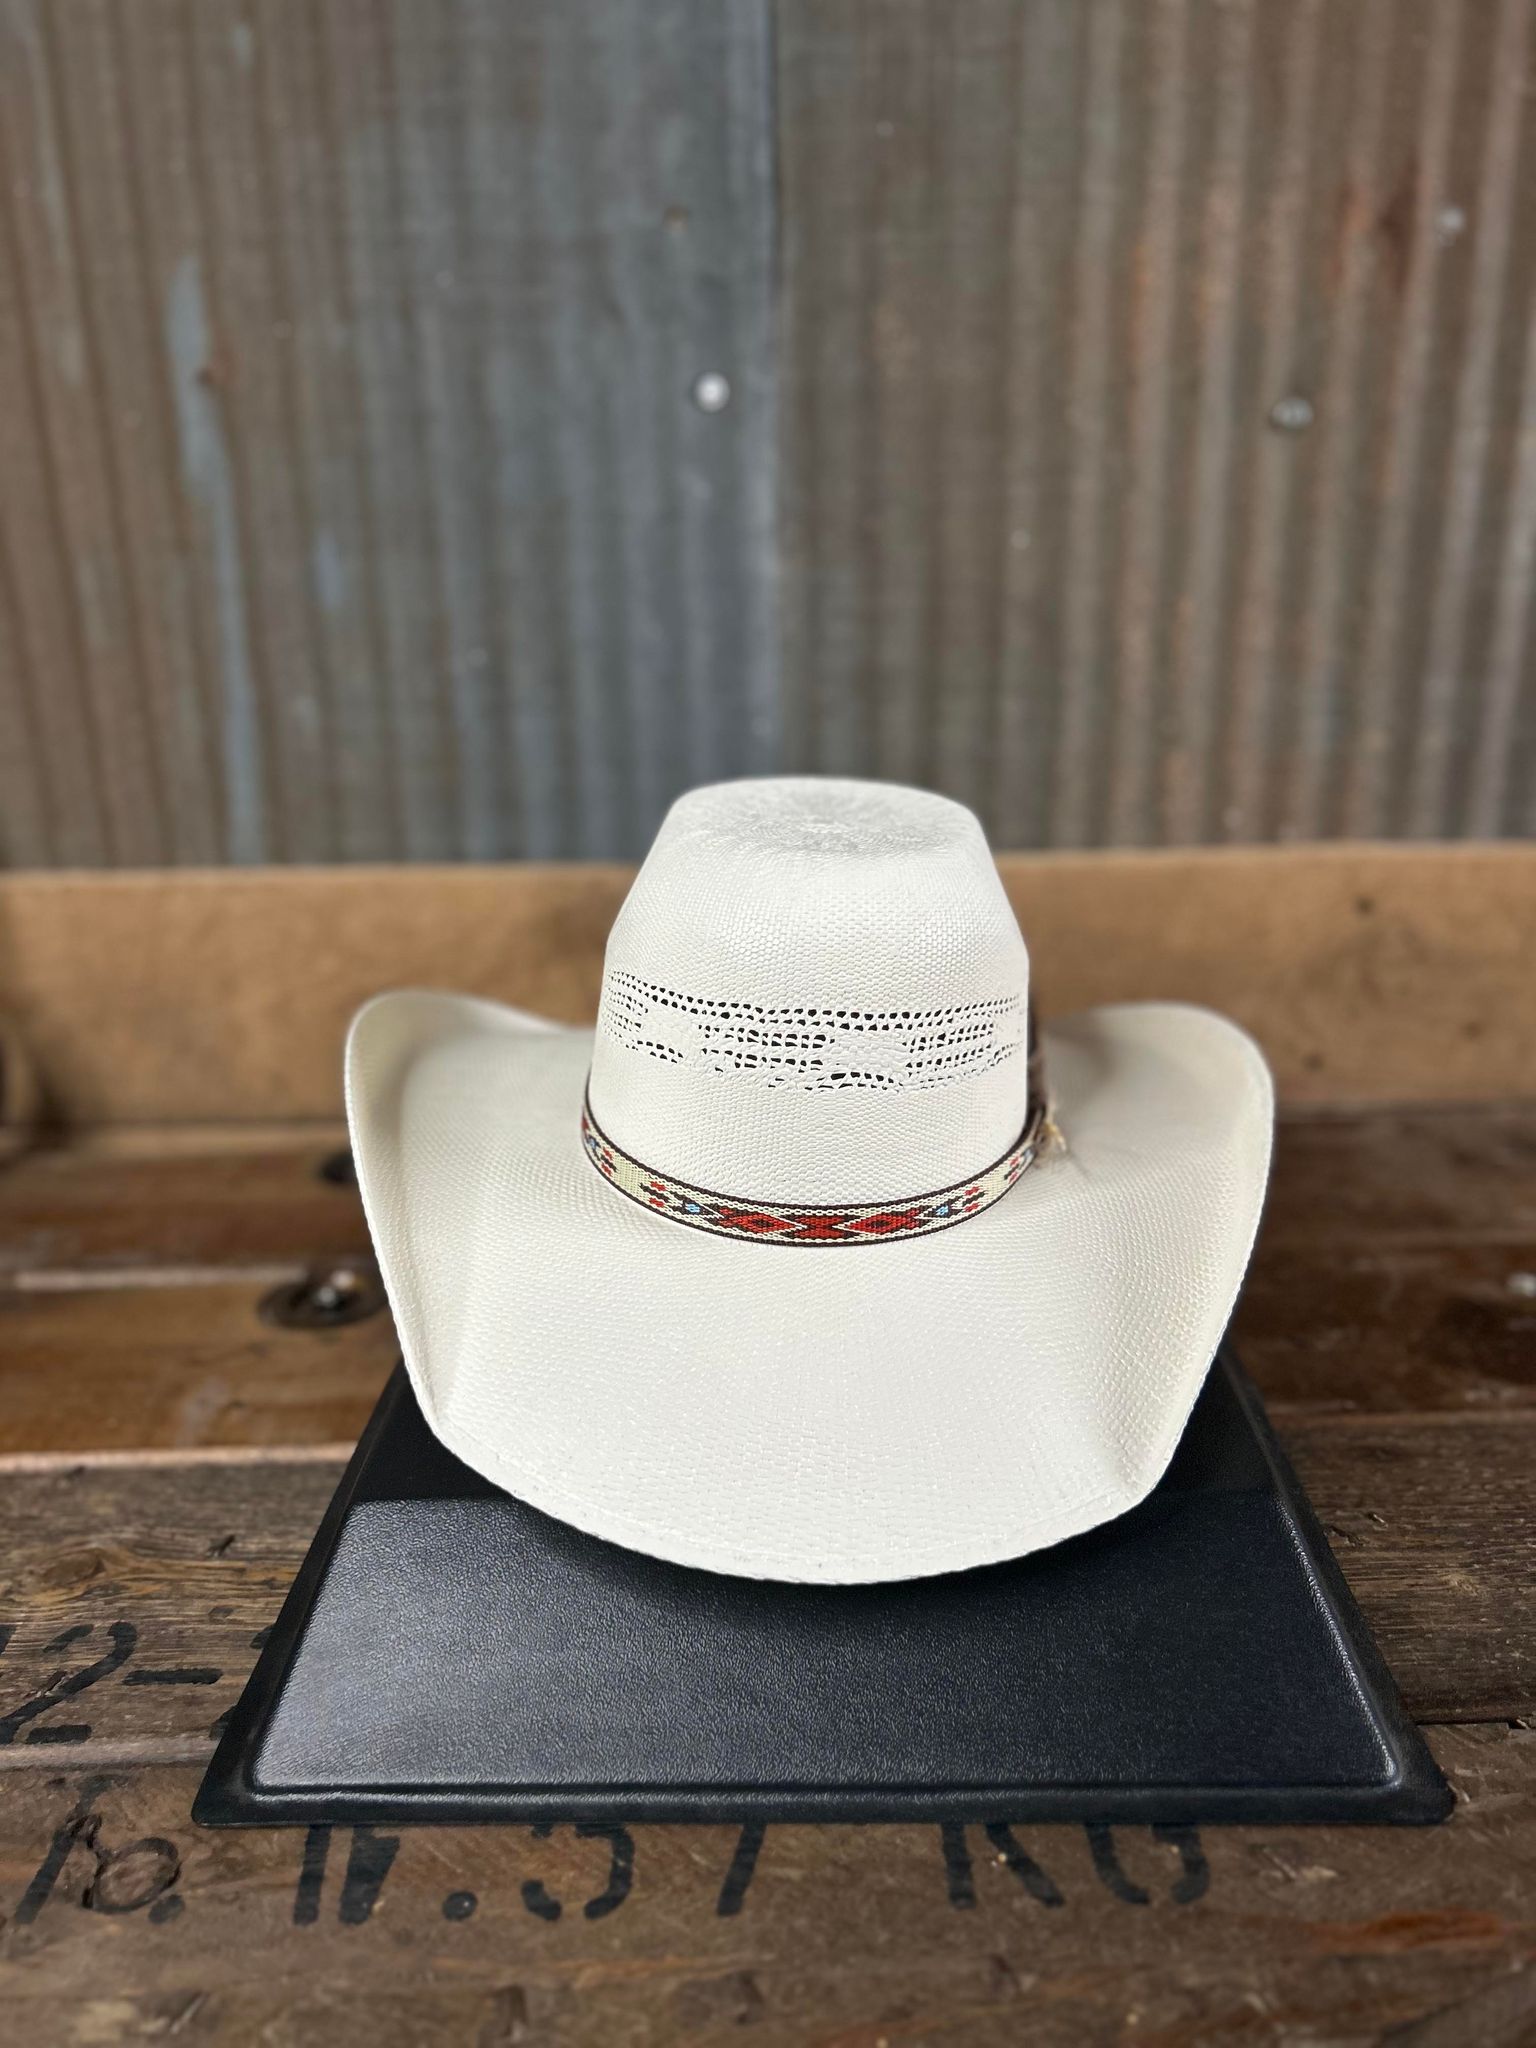 Resistol Young Gun Jr Youth Hat-Kids Straw Cowboy Hat-Resistol-Lucky J Boots & More, Women's, Men's, & Kids Western Store Located in Carthage, MO